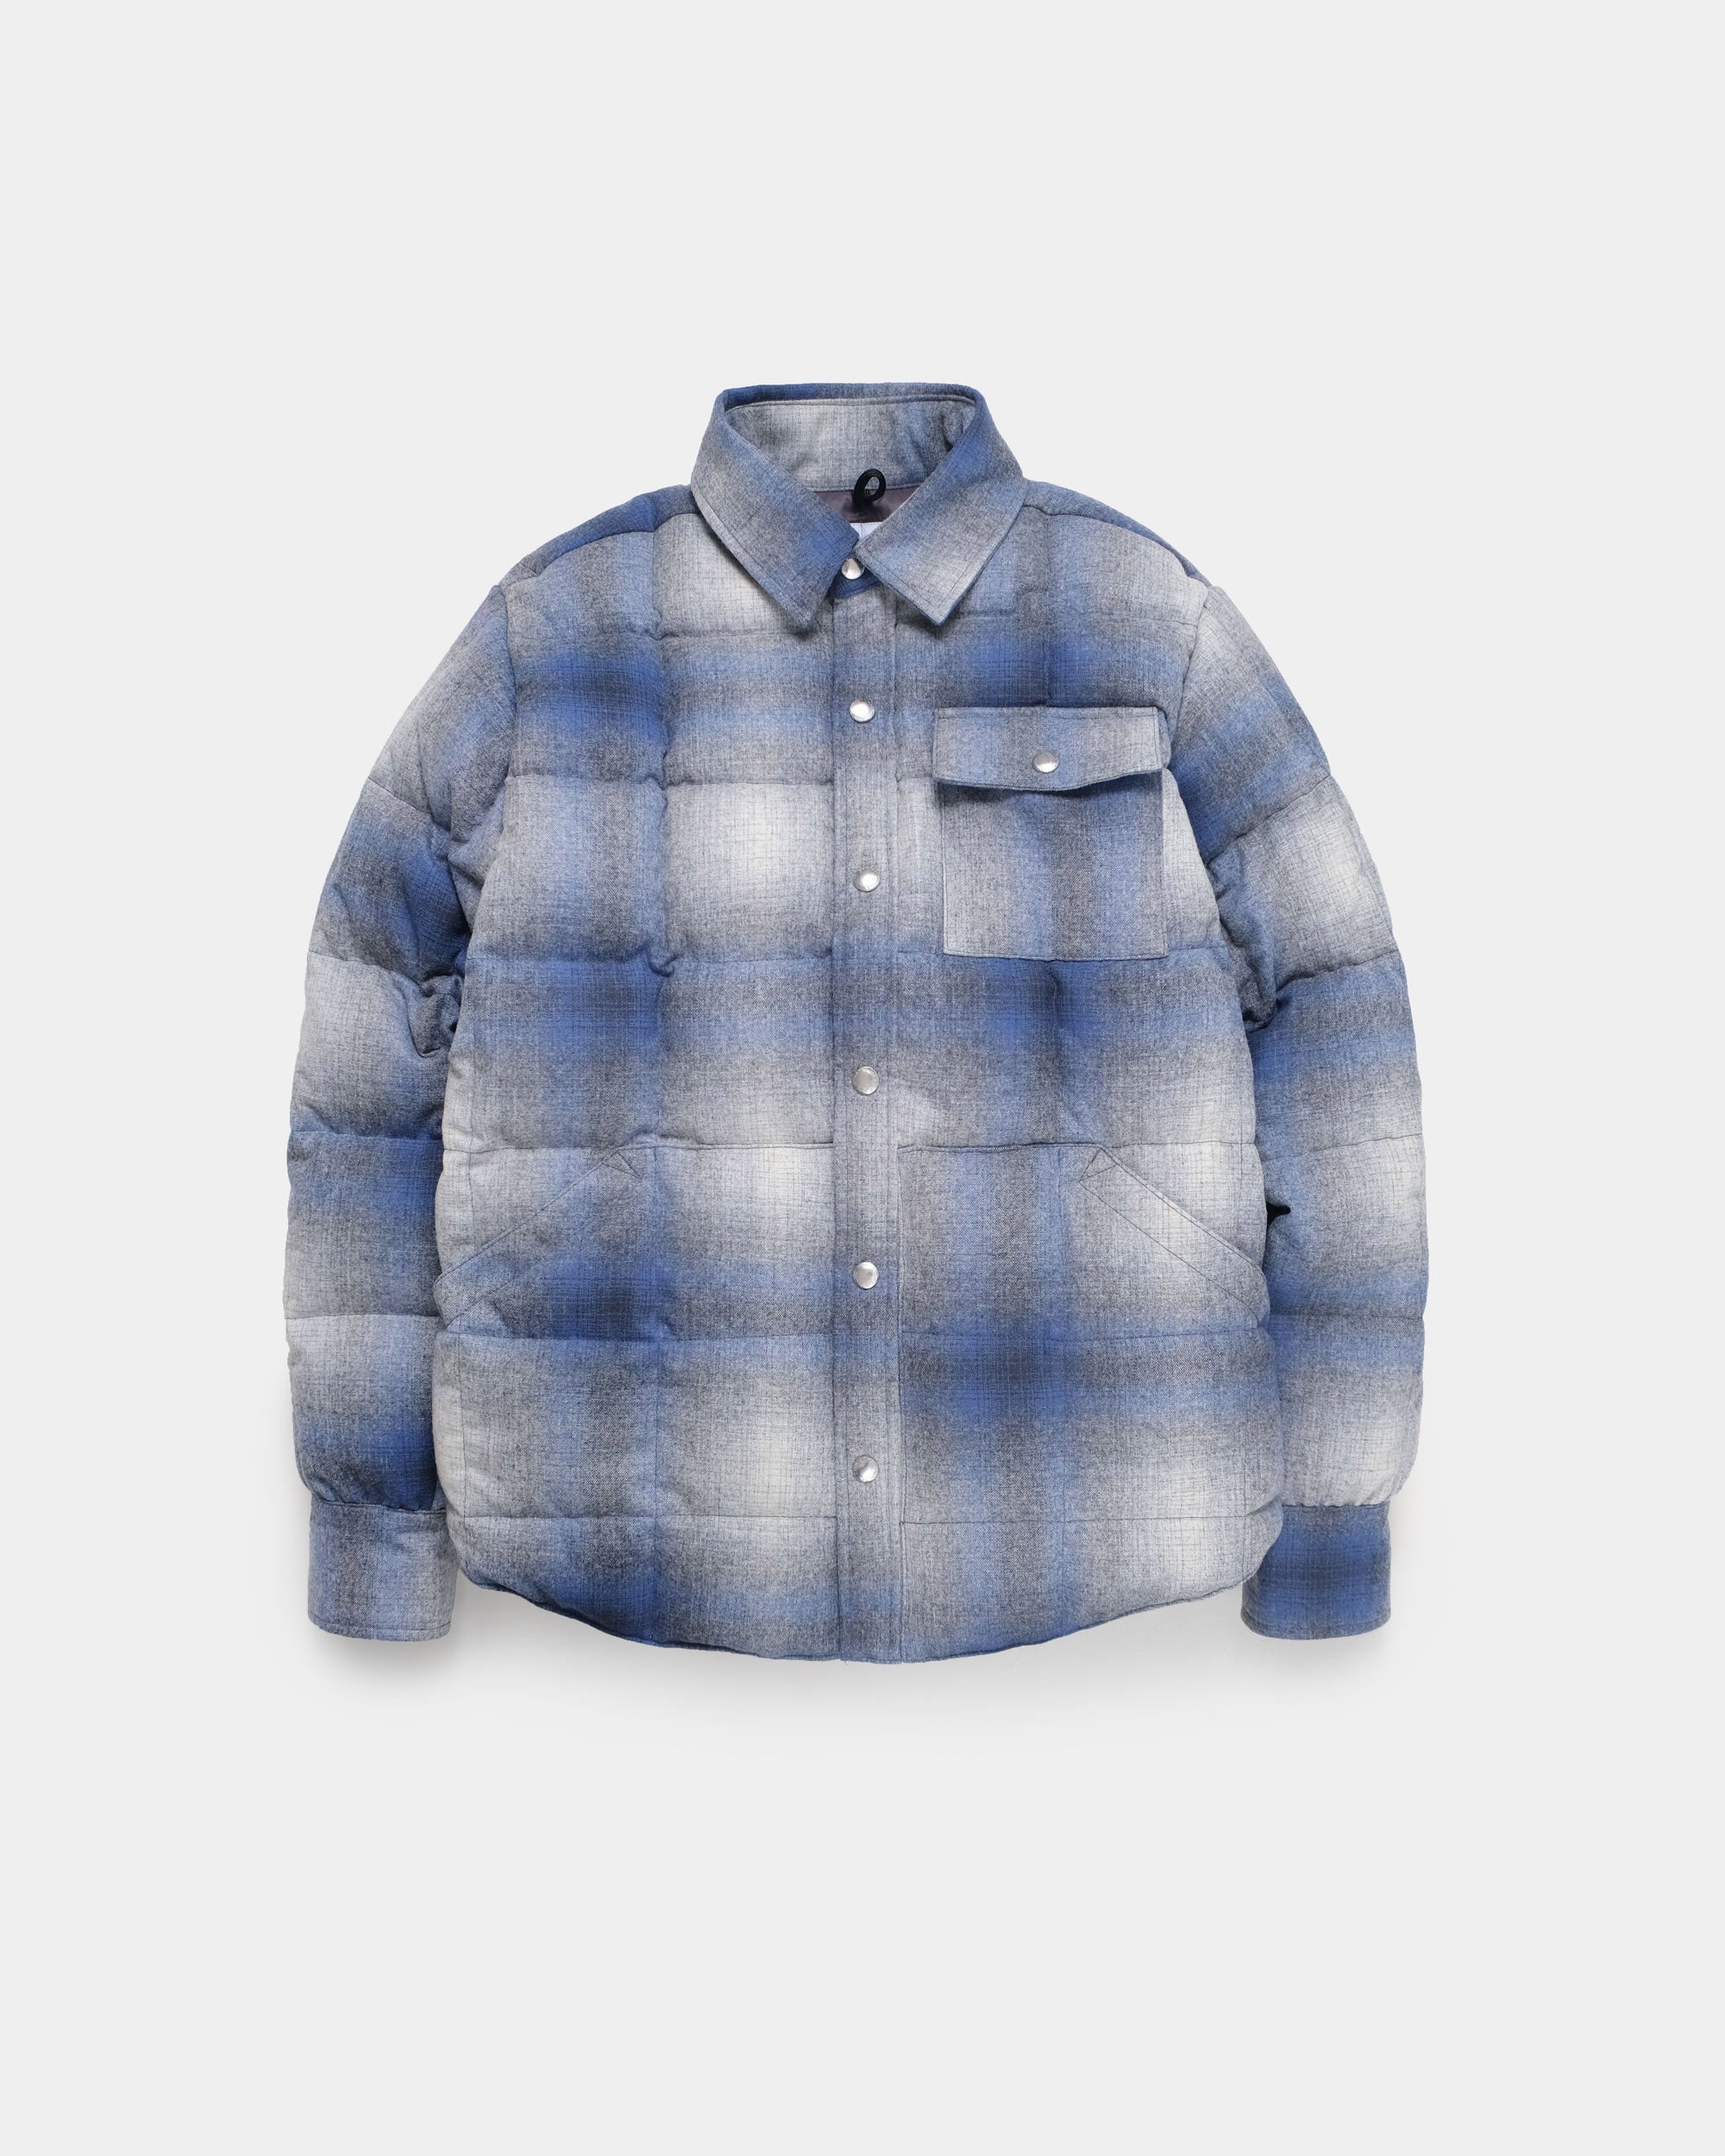 DOWN SHIRT - Crescent Down Works